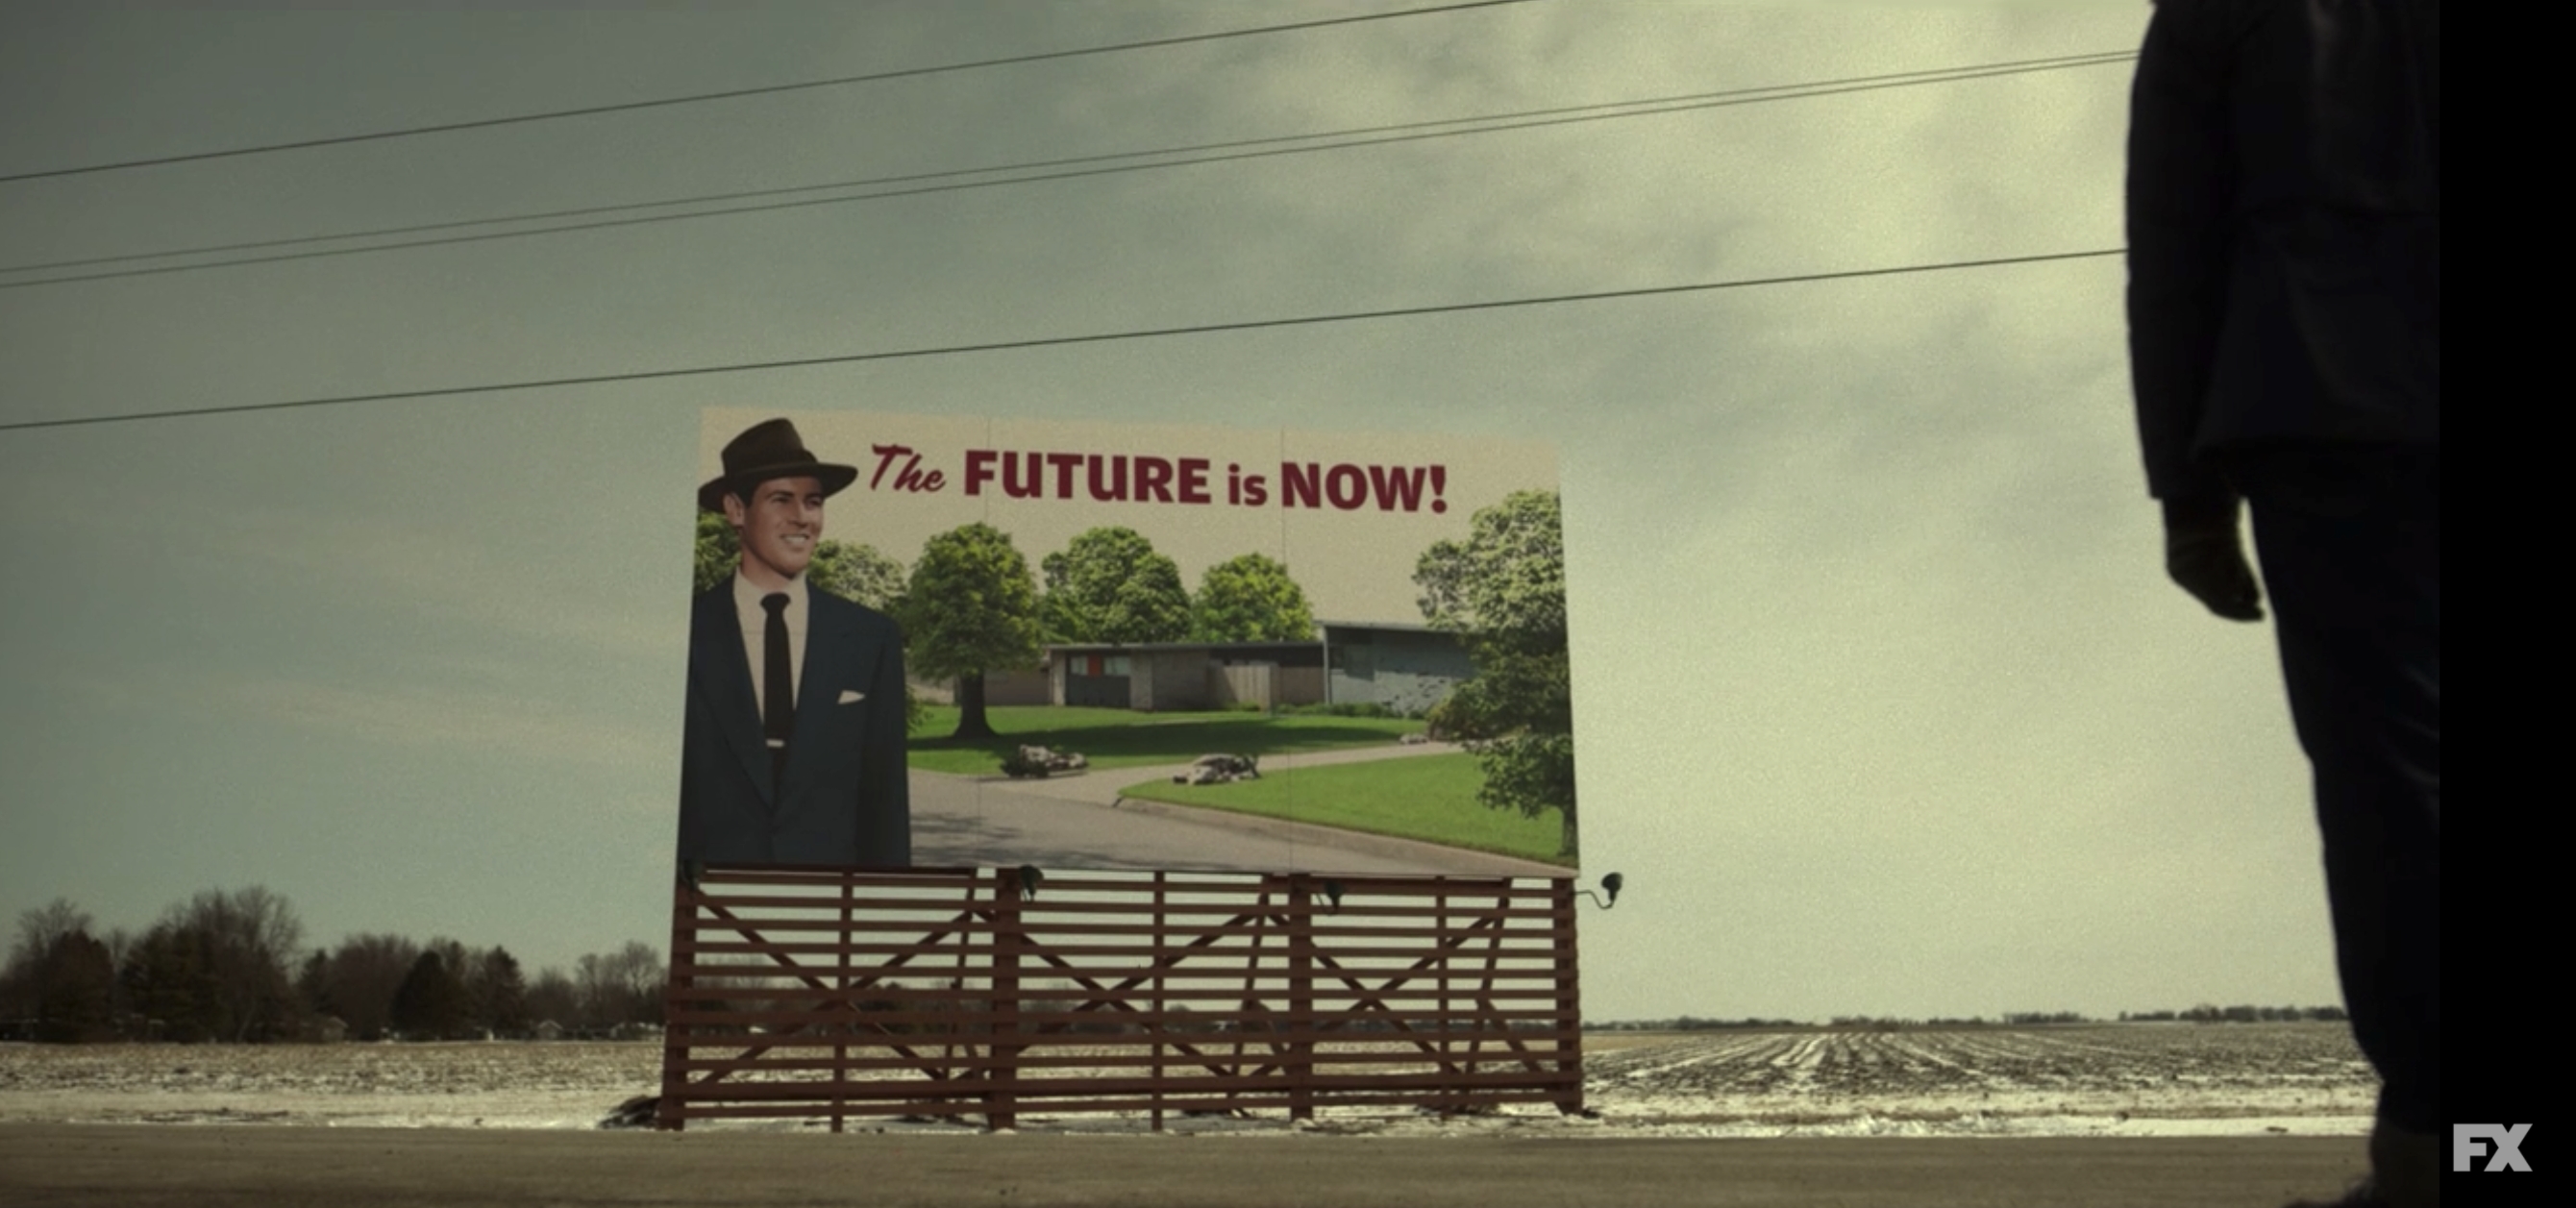 Nowhere near. The Future is Now. "The Future is Now old man" ~ Malcolm in the Middle. Fargo Wallpaper.